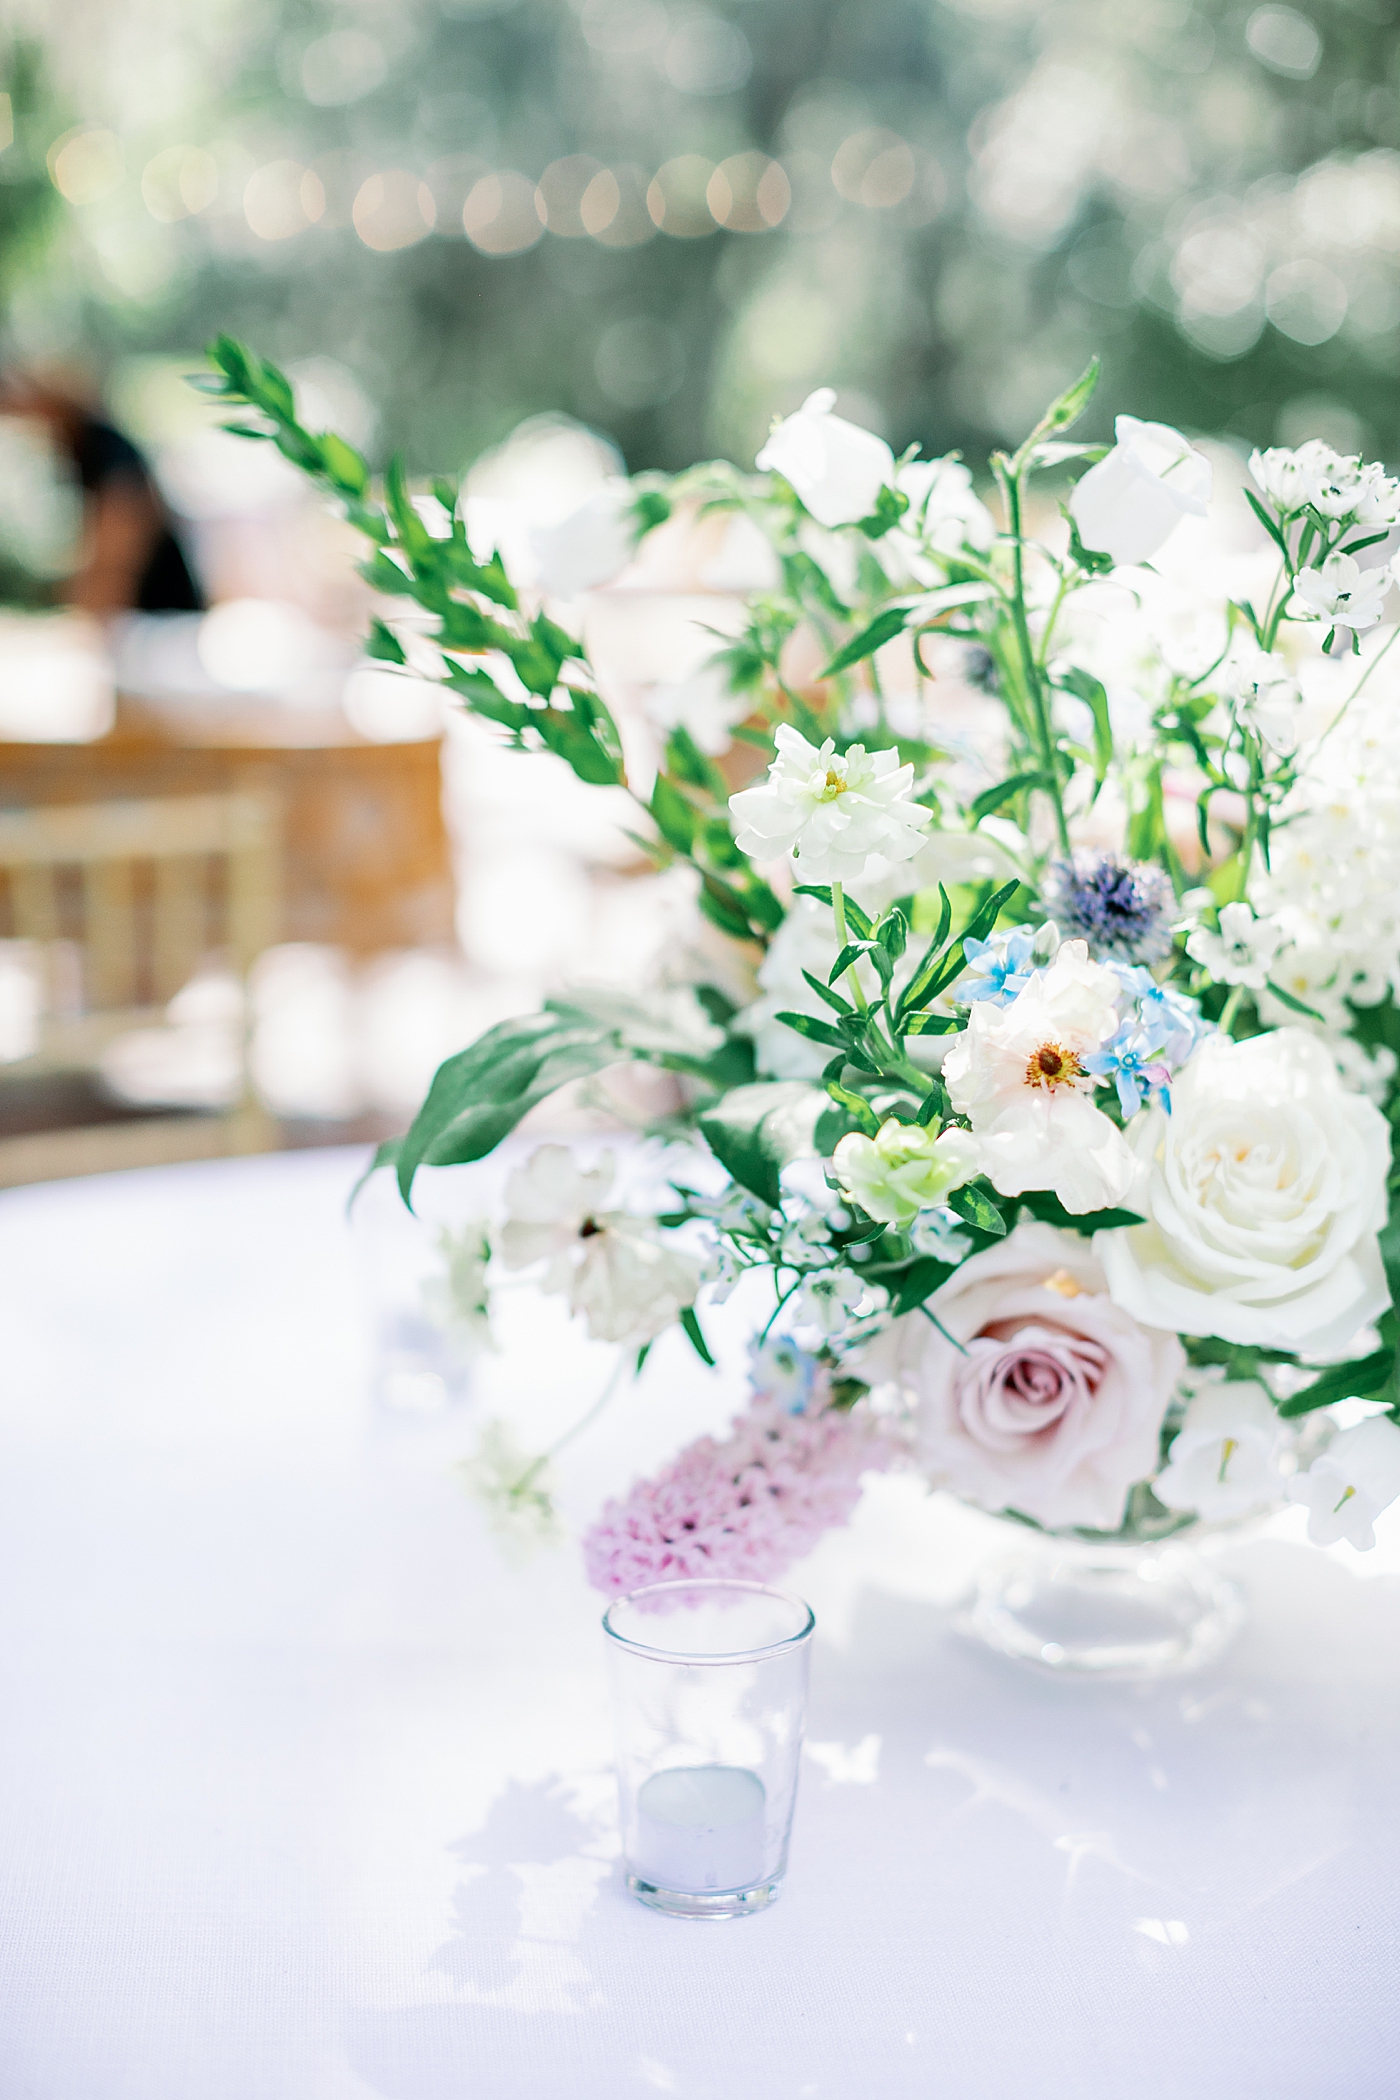 Reception details with votives and flowers during Elegant Grandmillenial Charleston Wedding | Images by Annie Laura Photography